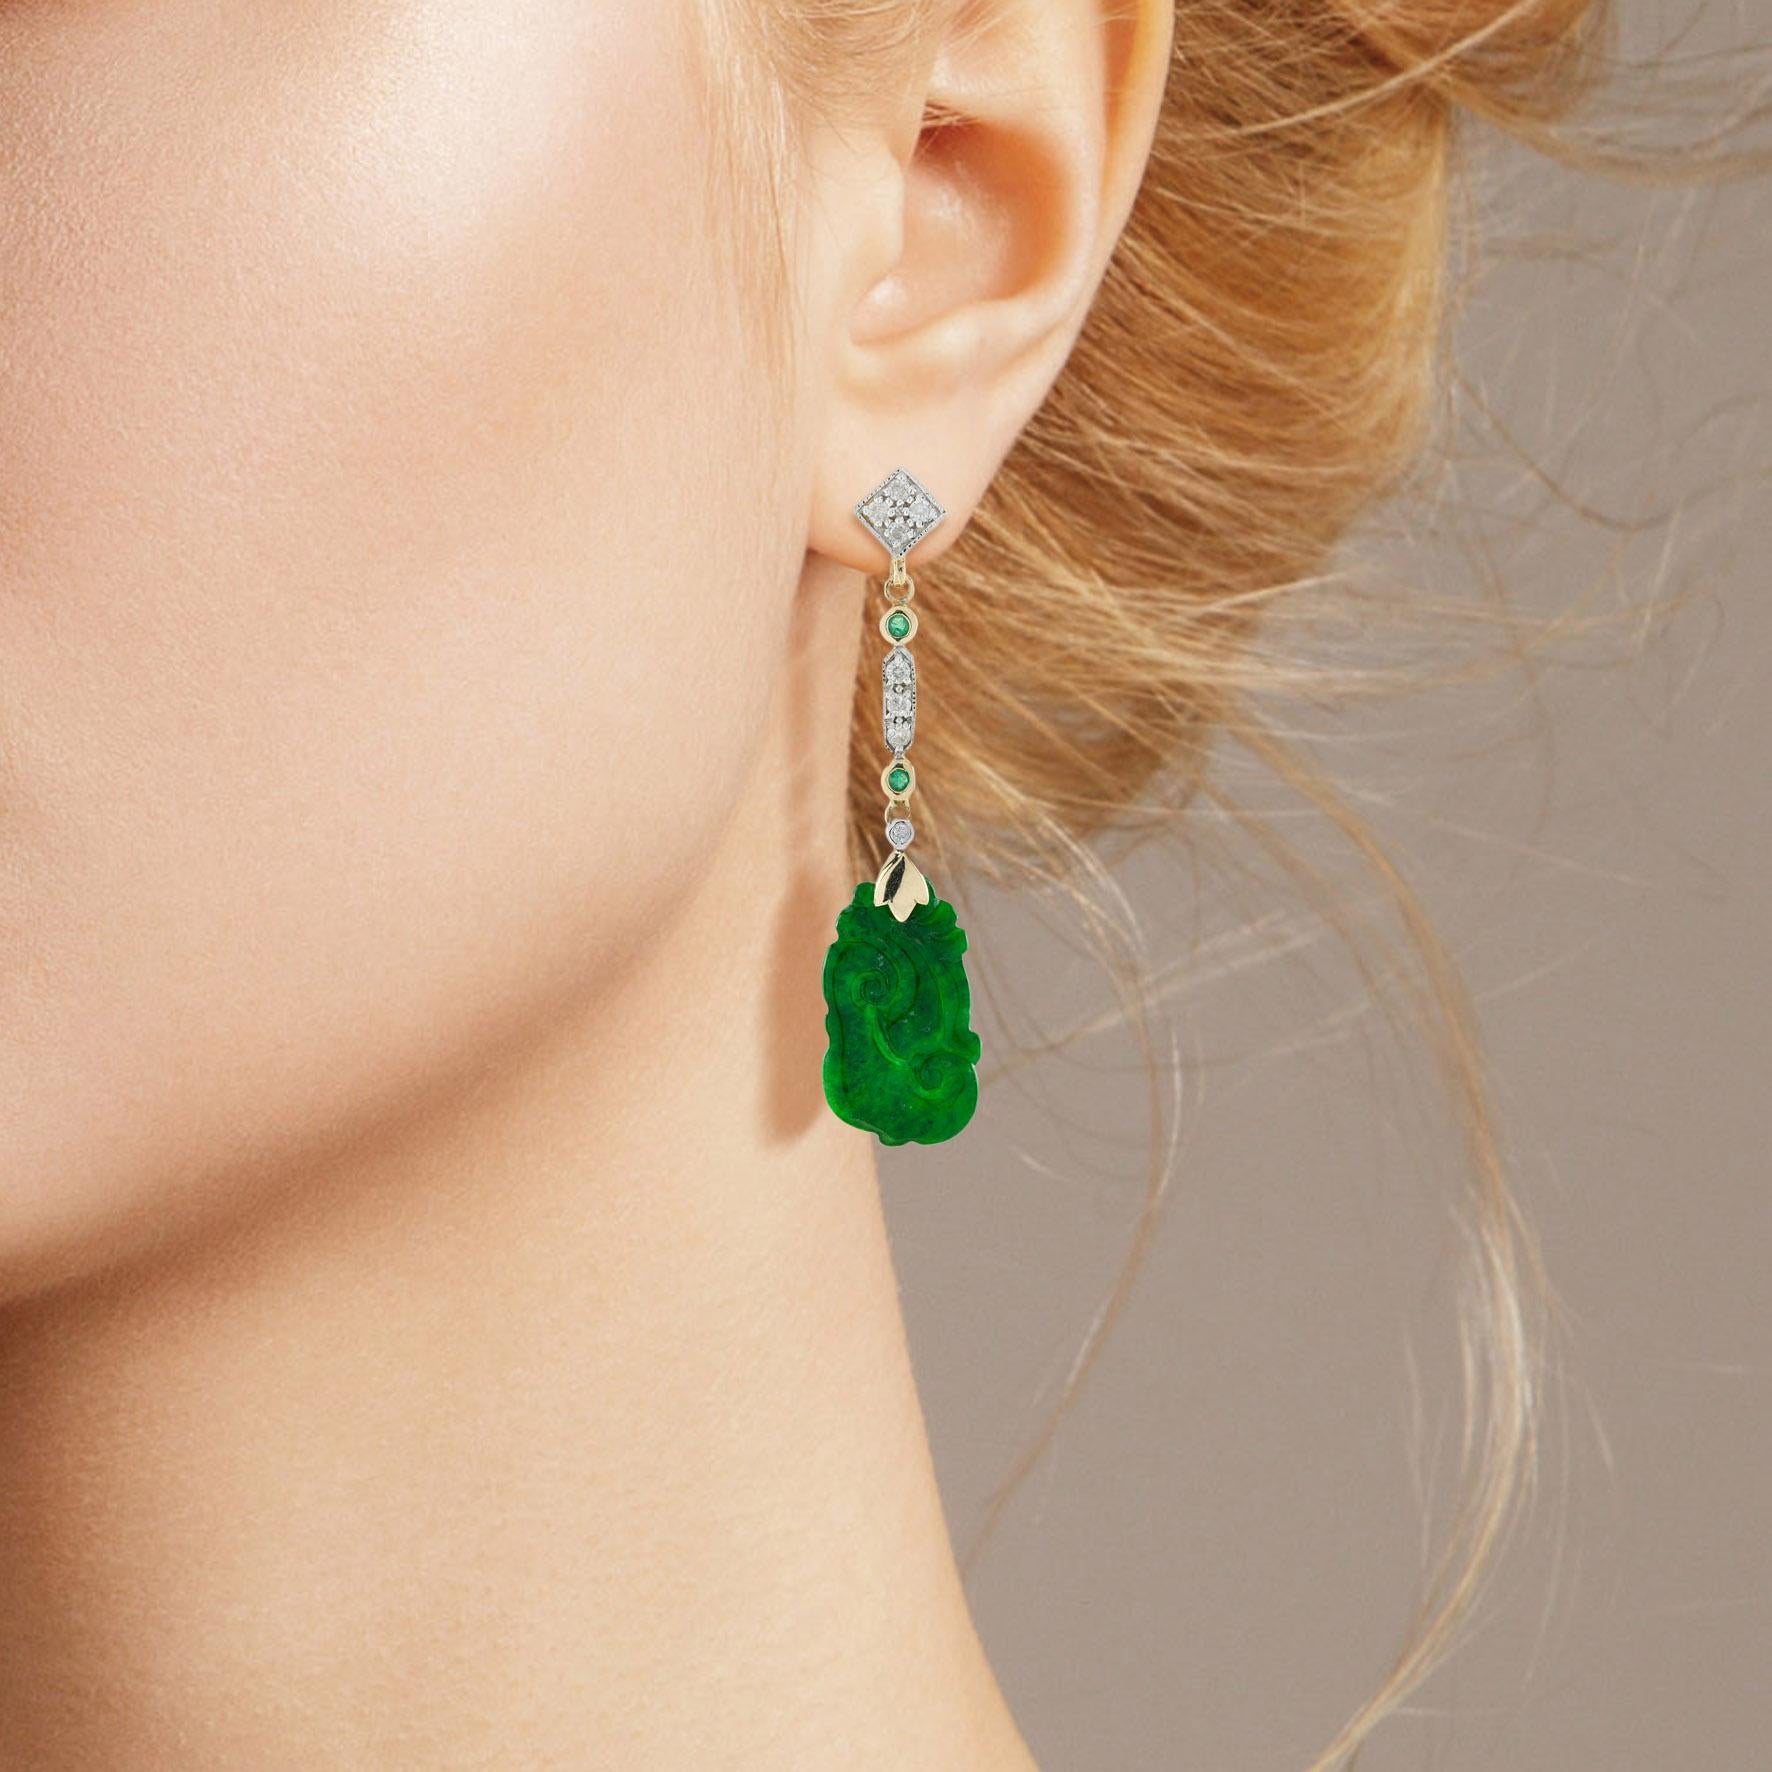 The natural jade in these lovely earrings has some very special shape. Both pieces have a strong green color and well carvings. The jade is suspended in a 9k yellow gold setting with emerald and diamond link on the top. The earrings transfer their